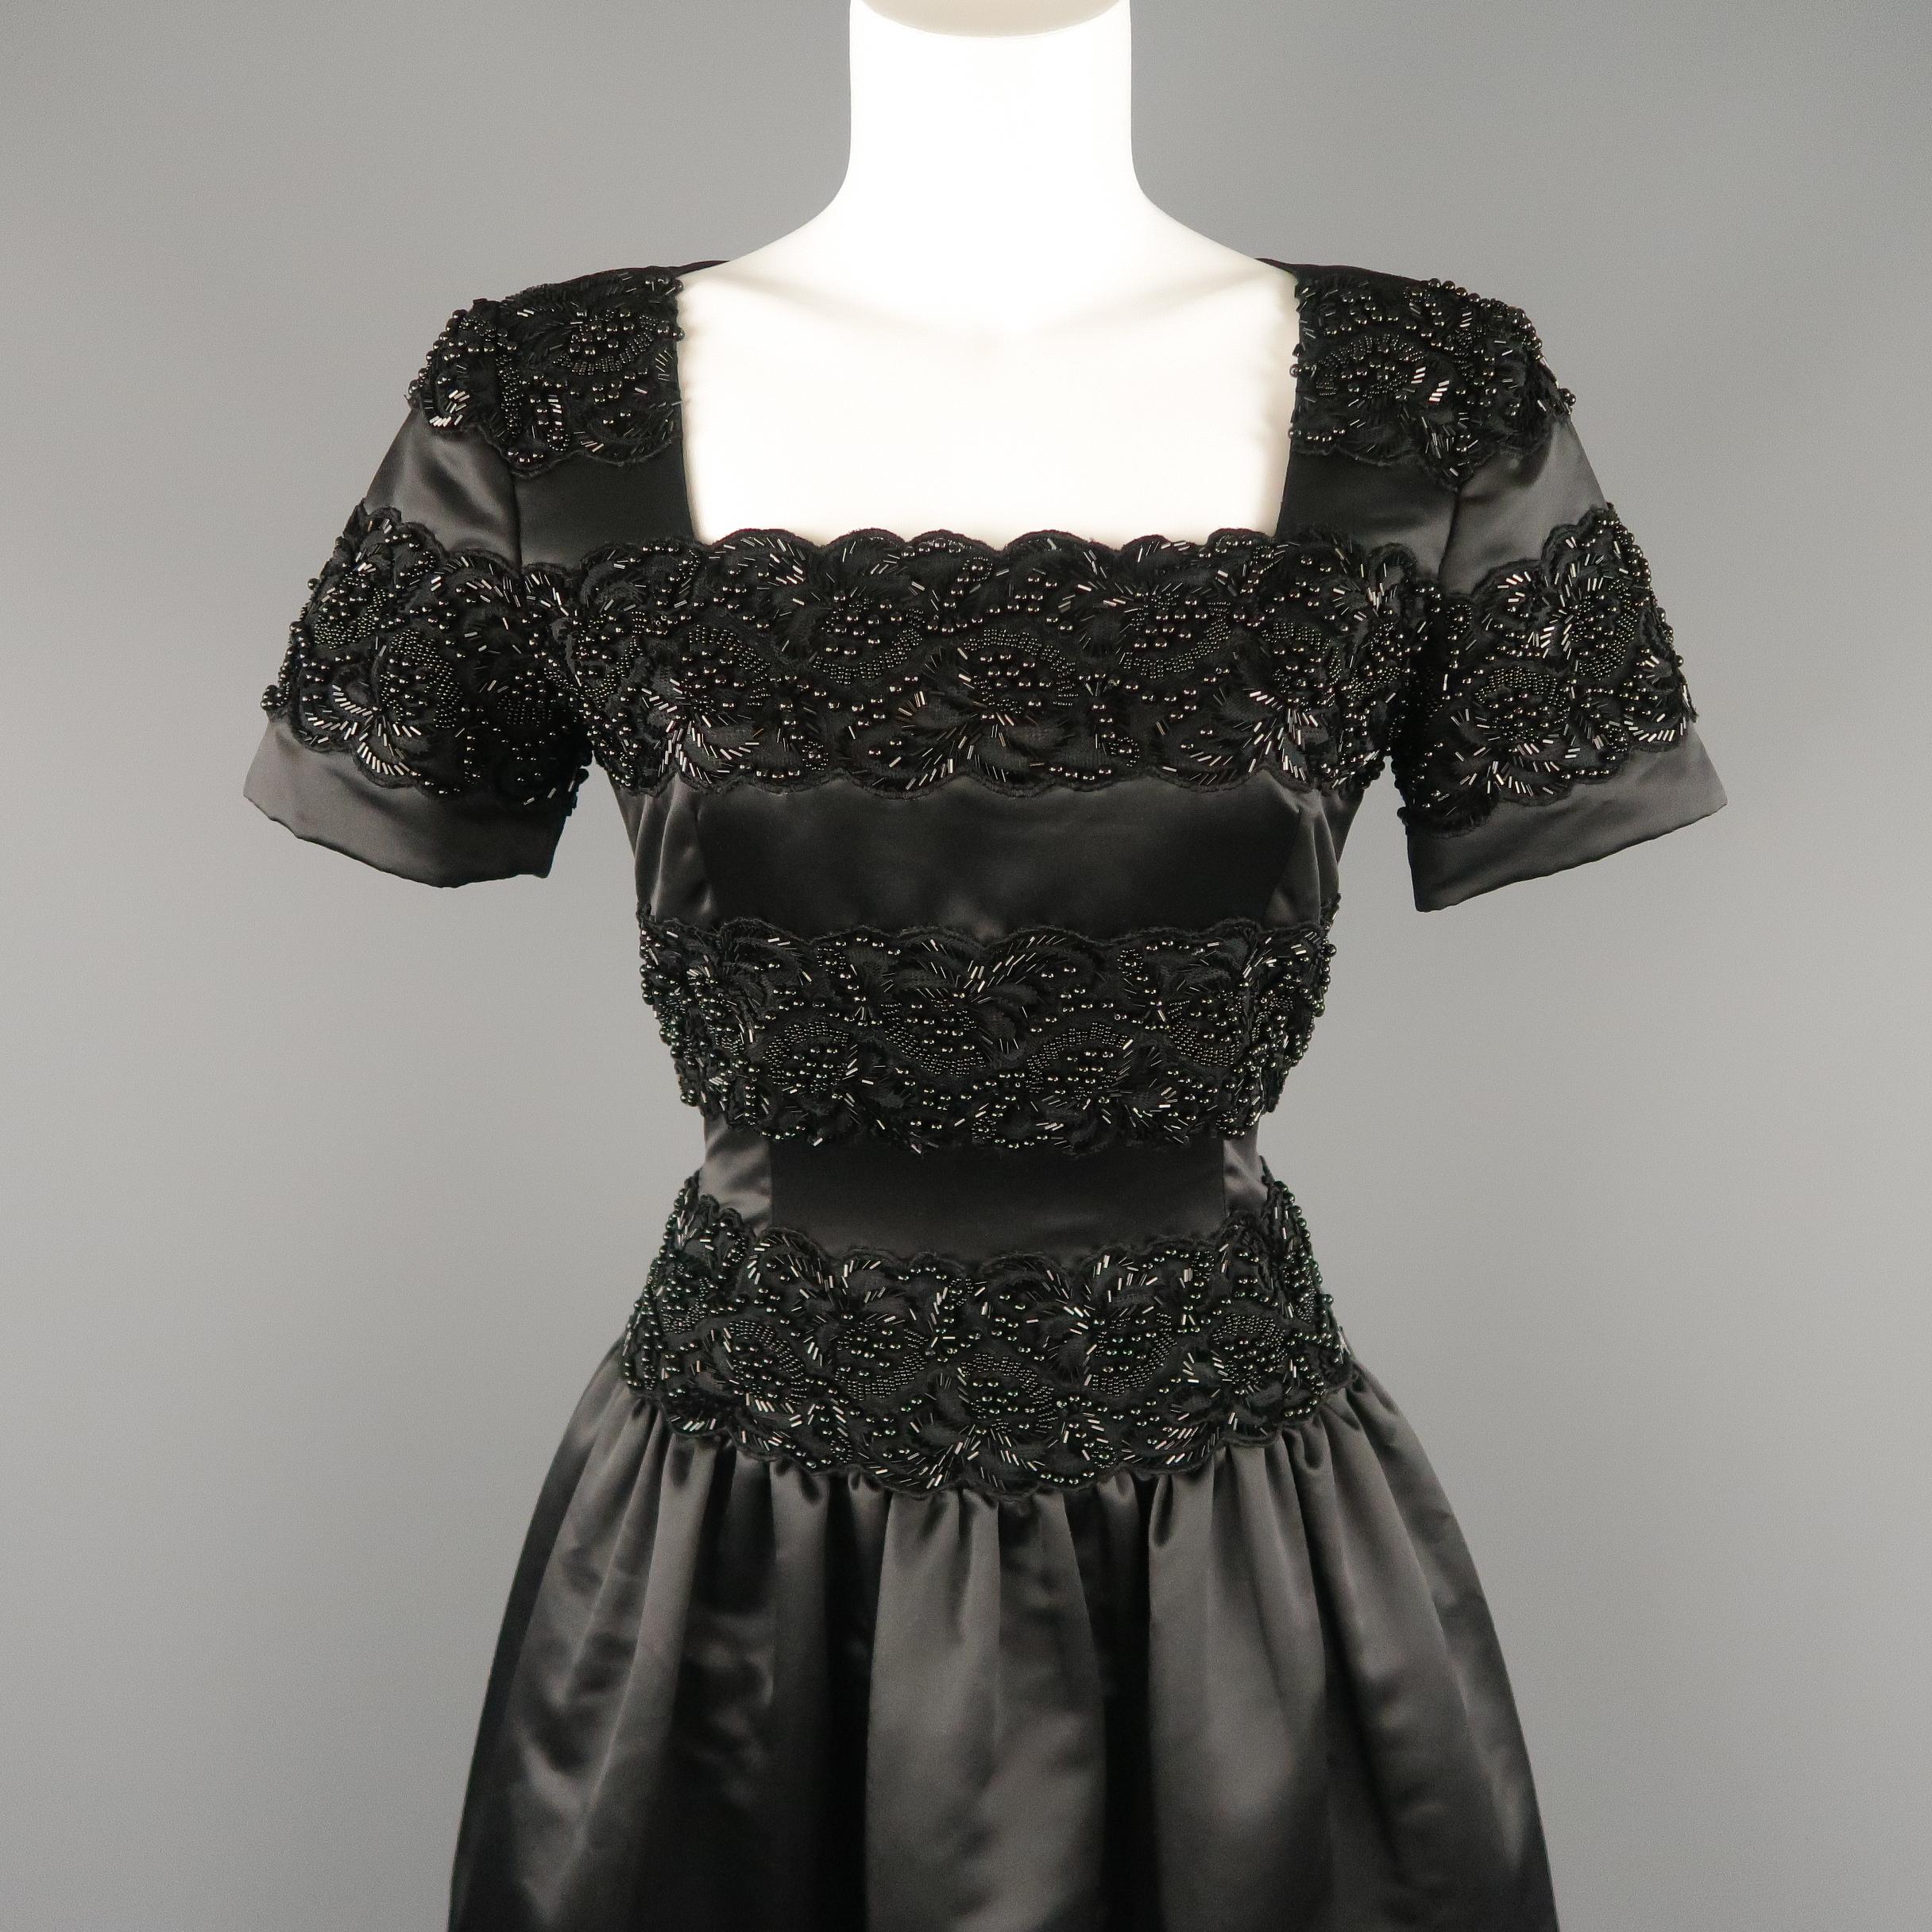 Vintage OSCAR DE LA RENTA STUDIO evening gown comes in black satin with a portrait collar, short sleeve, beaded top and drop waist gathered , full length, A line skirt.
 
New with Tags .
Marked: 4
 
Measurements:
 
Shoulder: 14 in.
Bust: 36